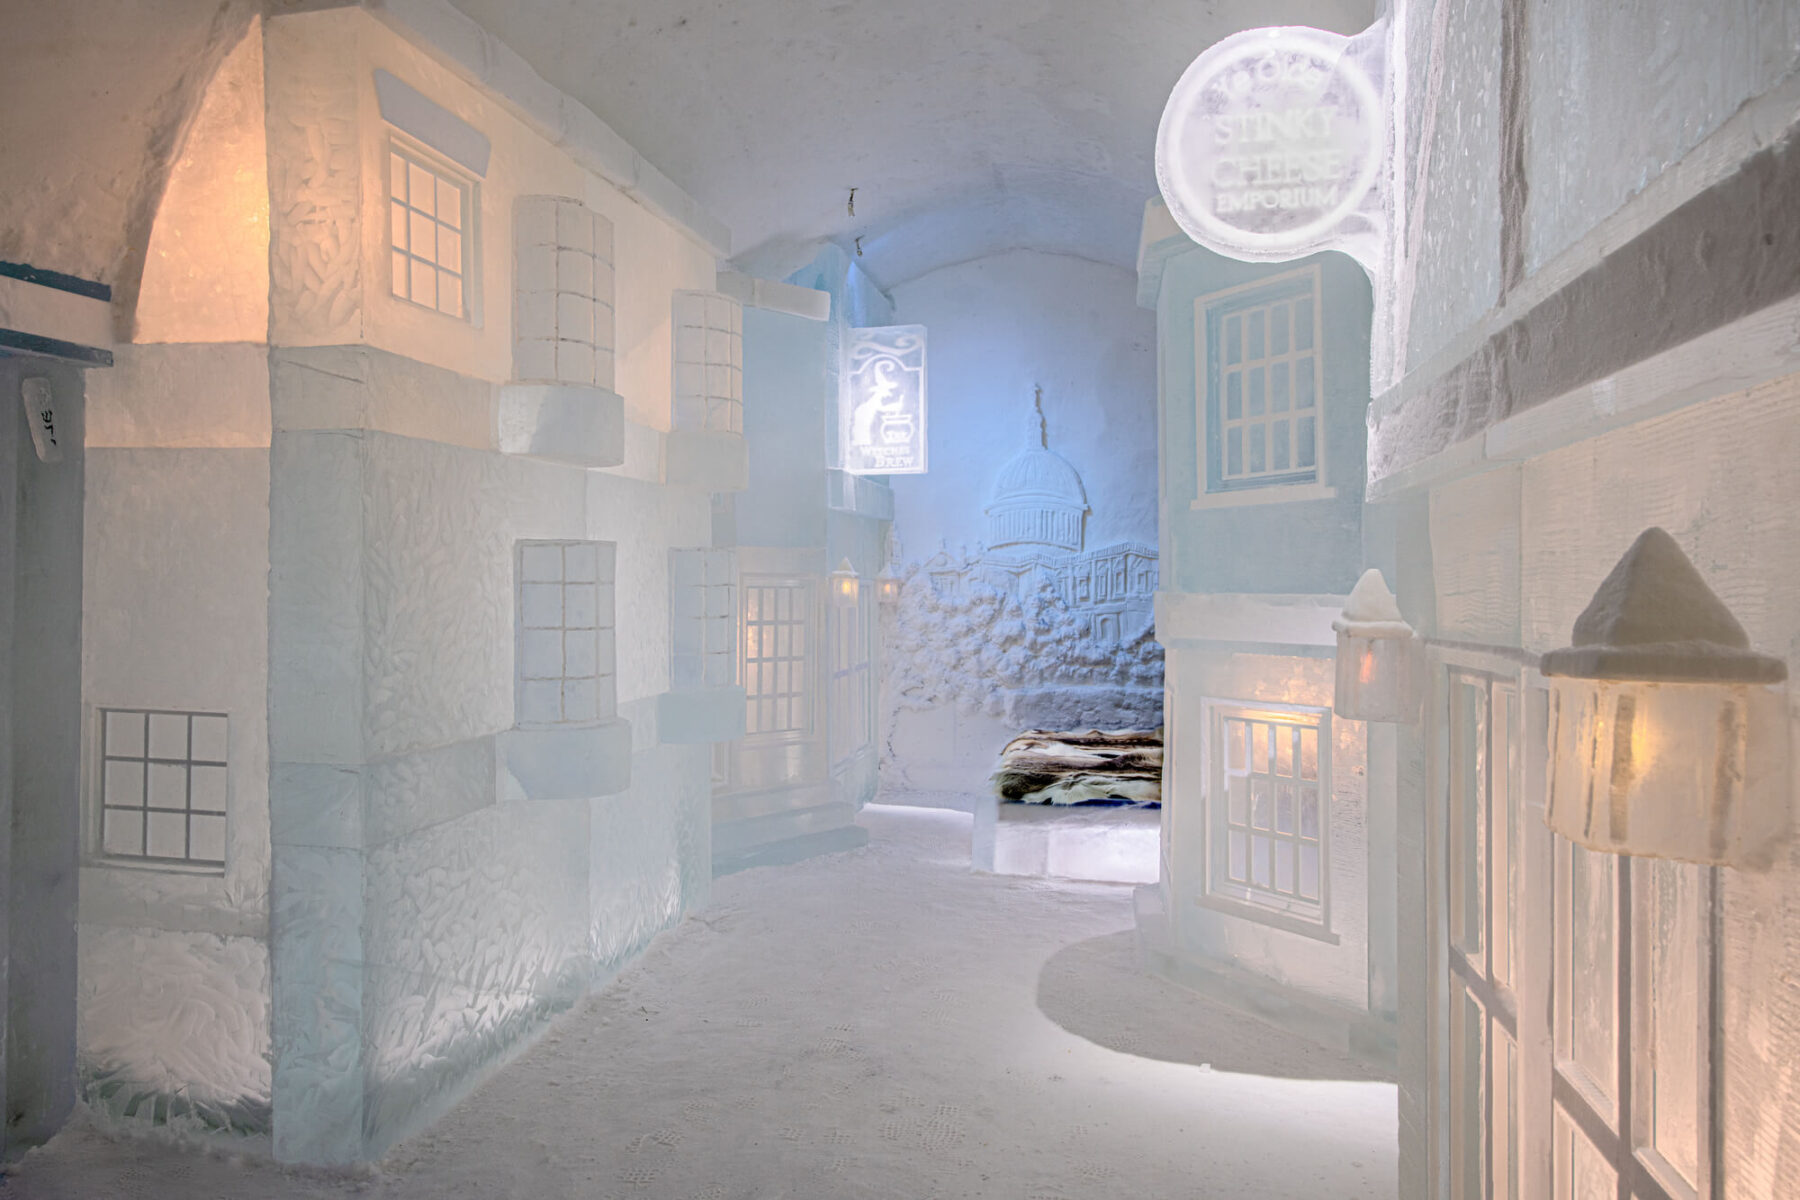 icehotel32 art suite dickensian street by jonathan and marnie green ak